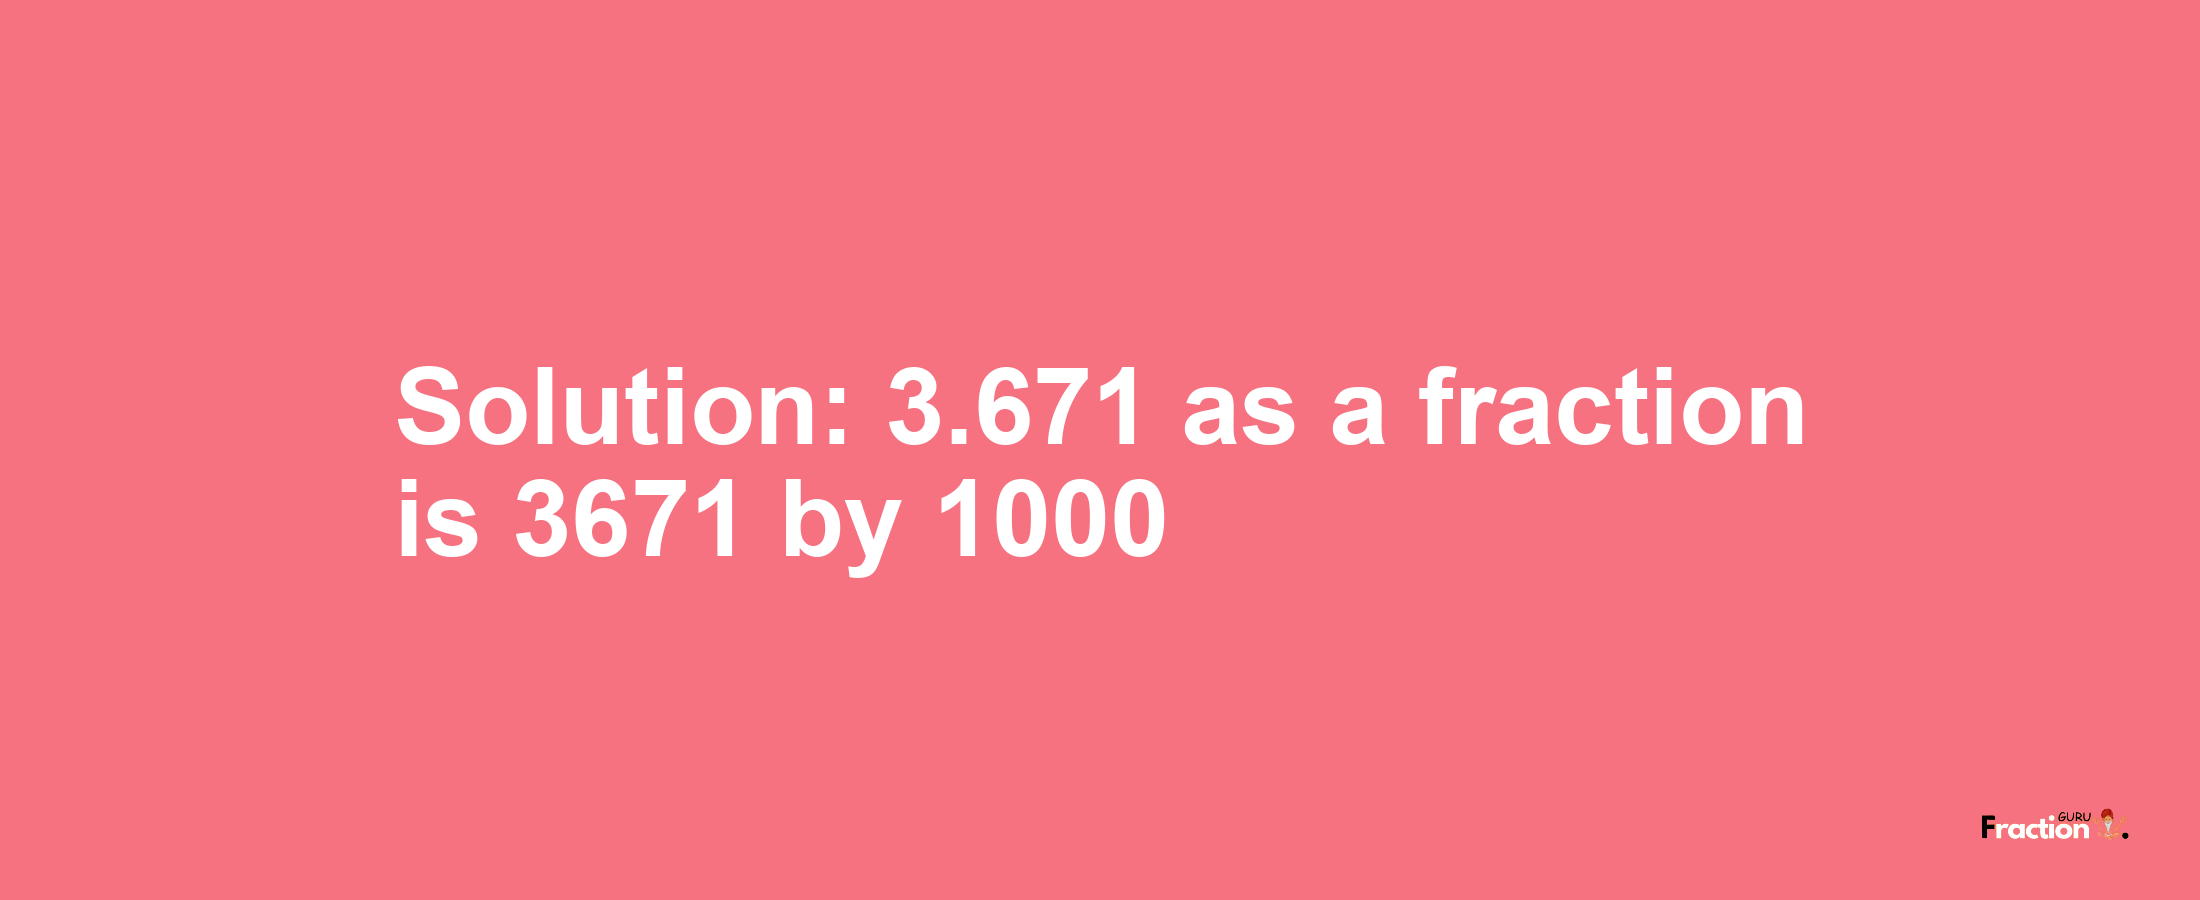 Solution:3.671 as a fraction is 3671/1000